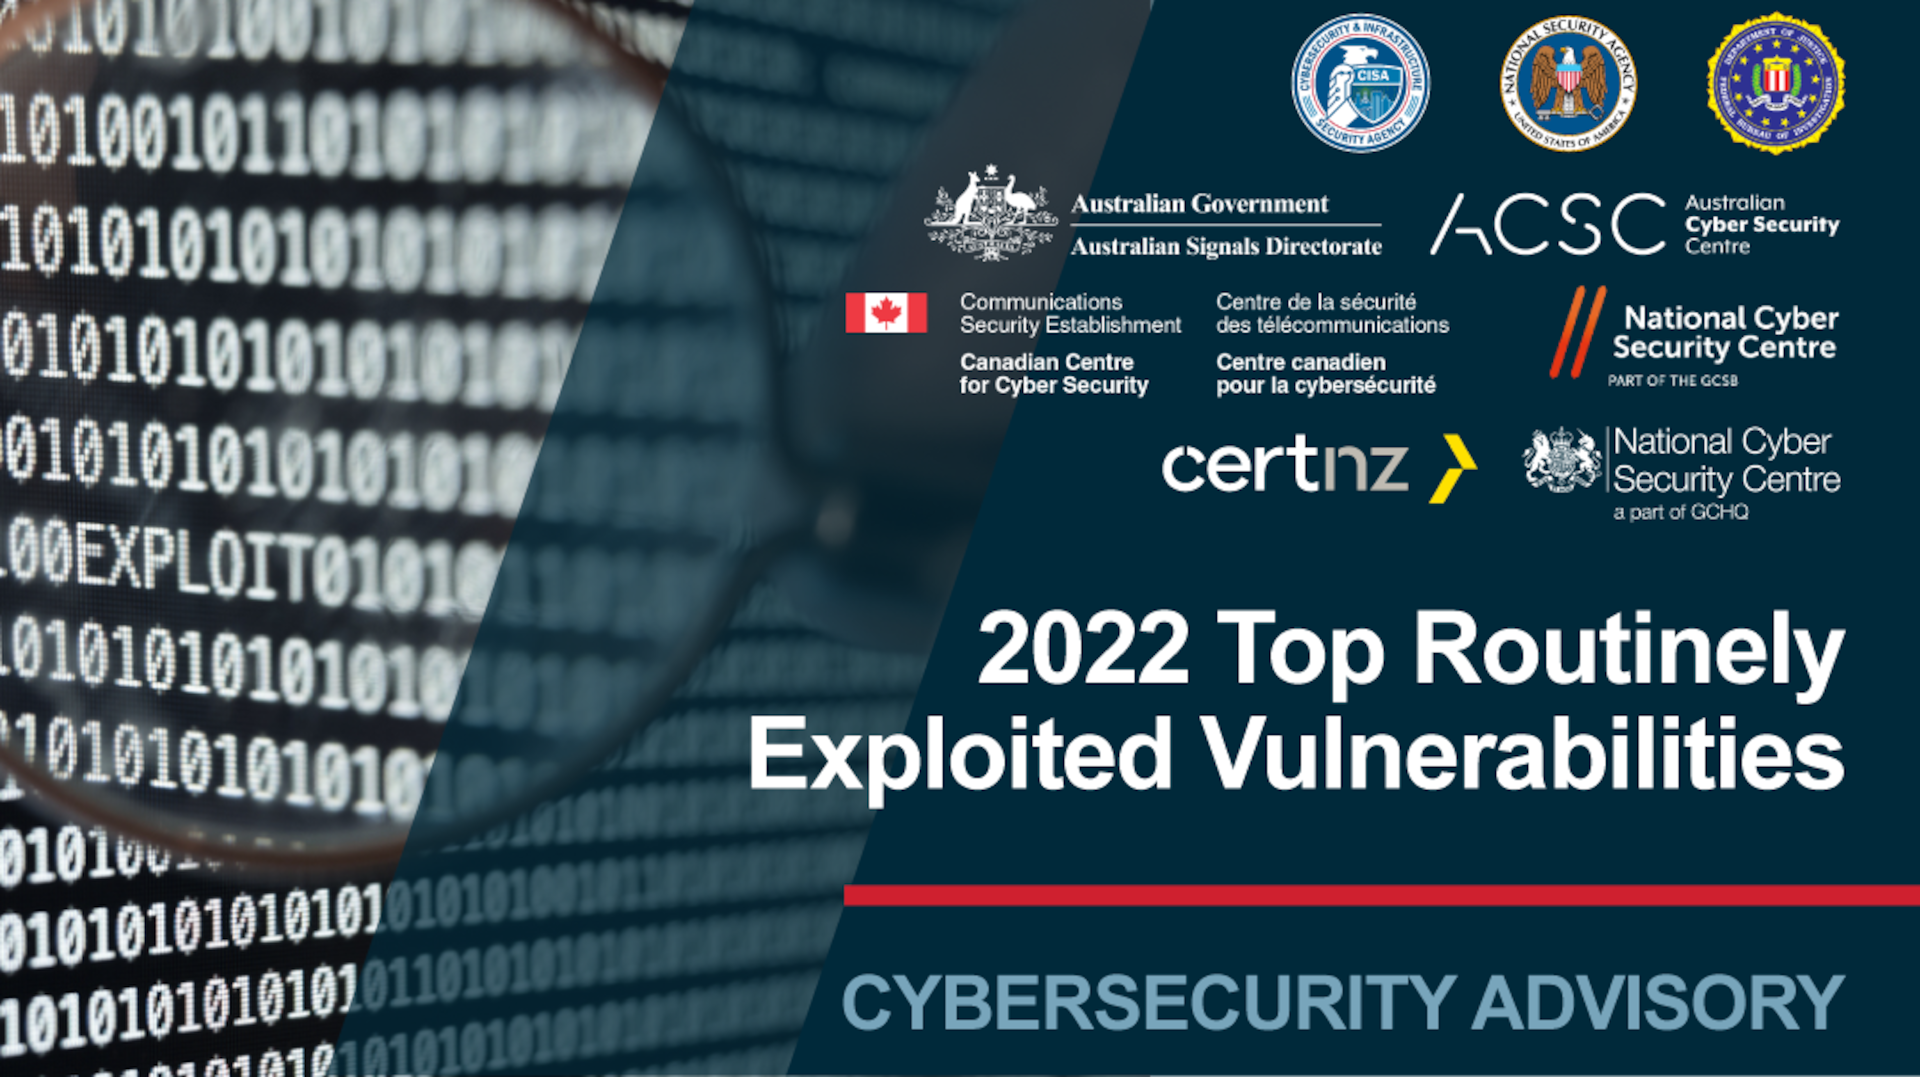 CSA: 2022 Top Routinely Exploited Vulnerabilities